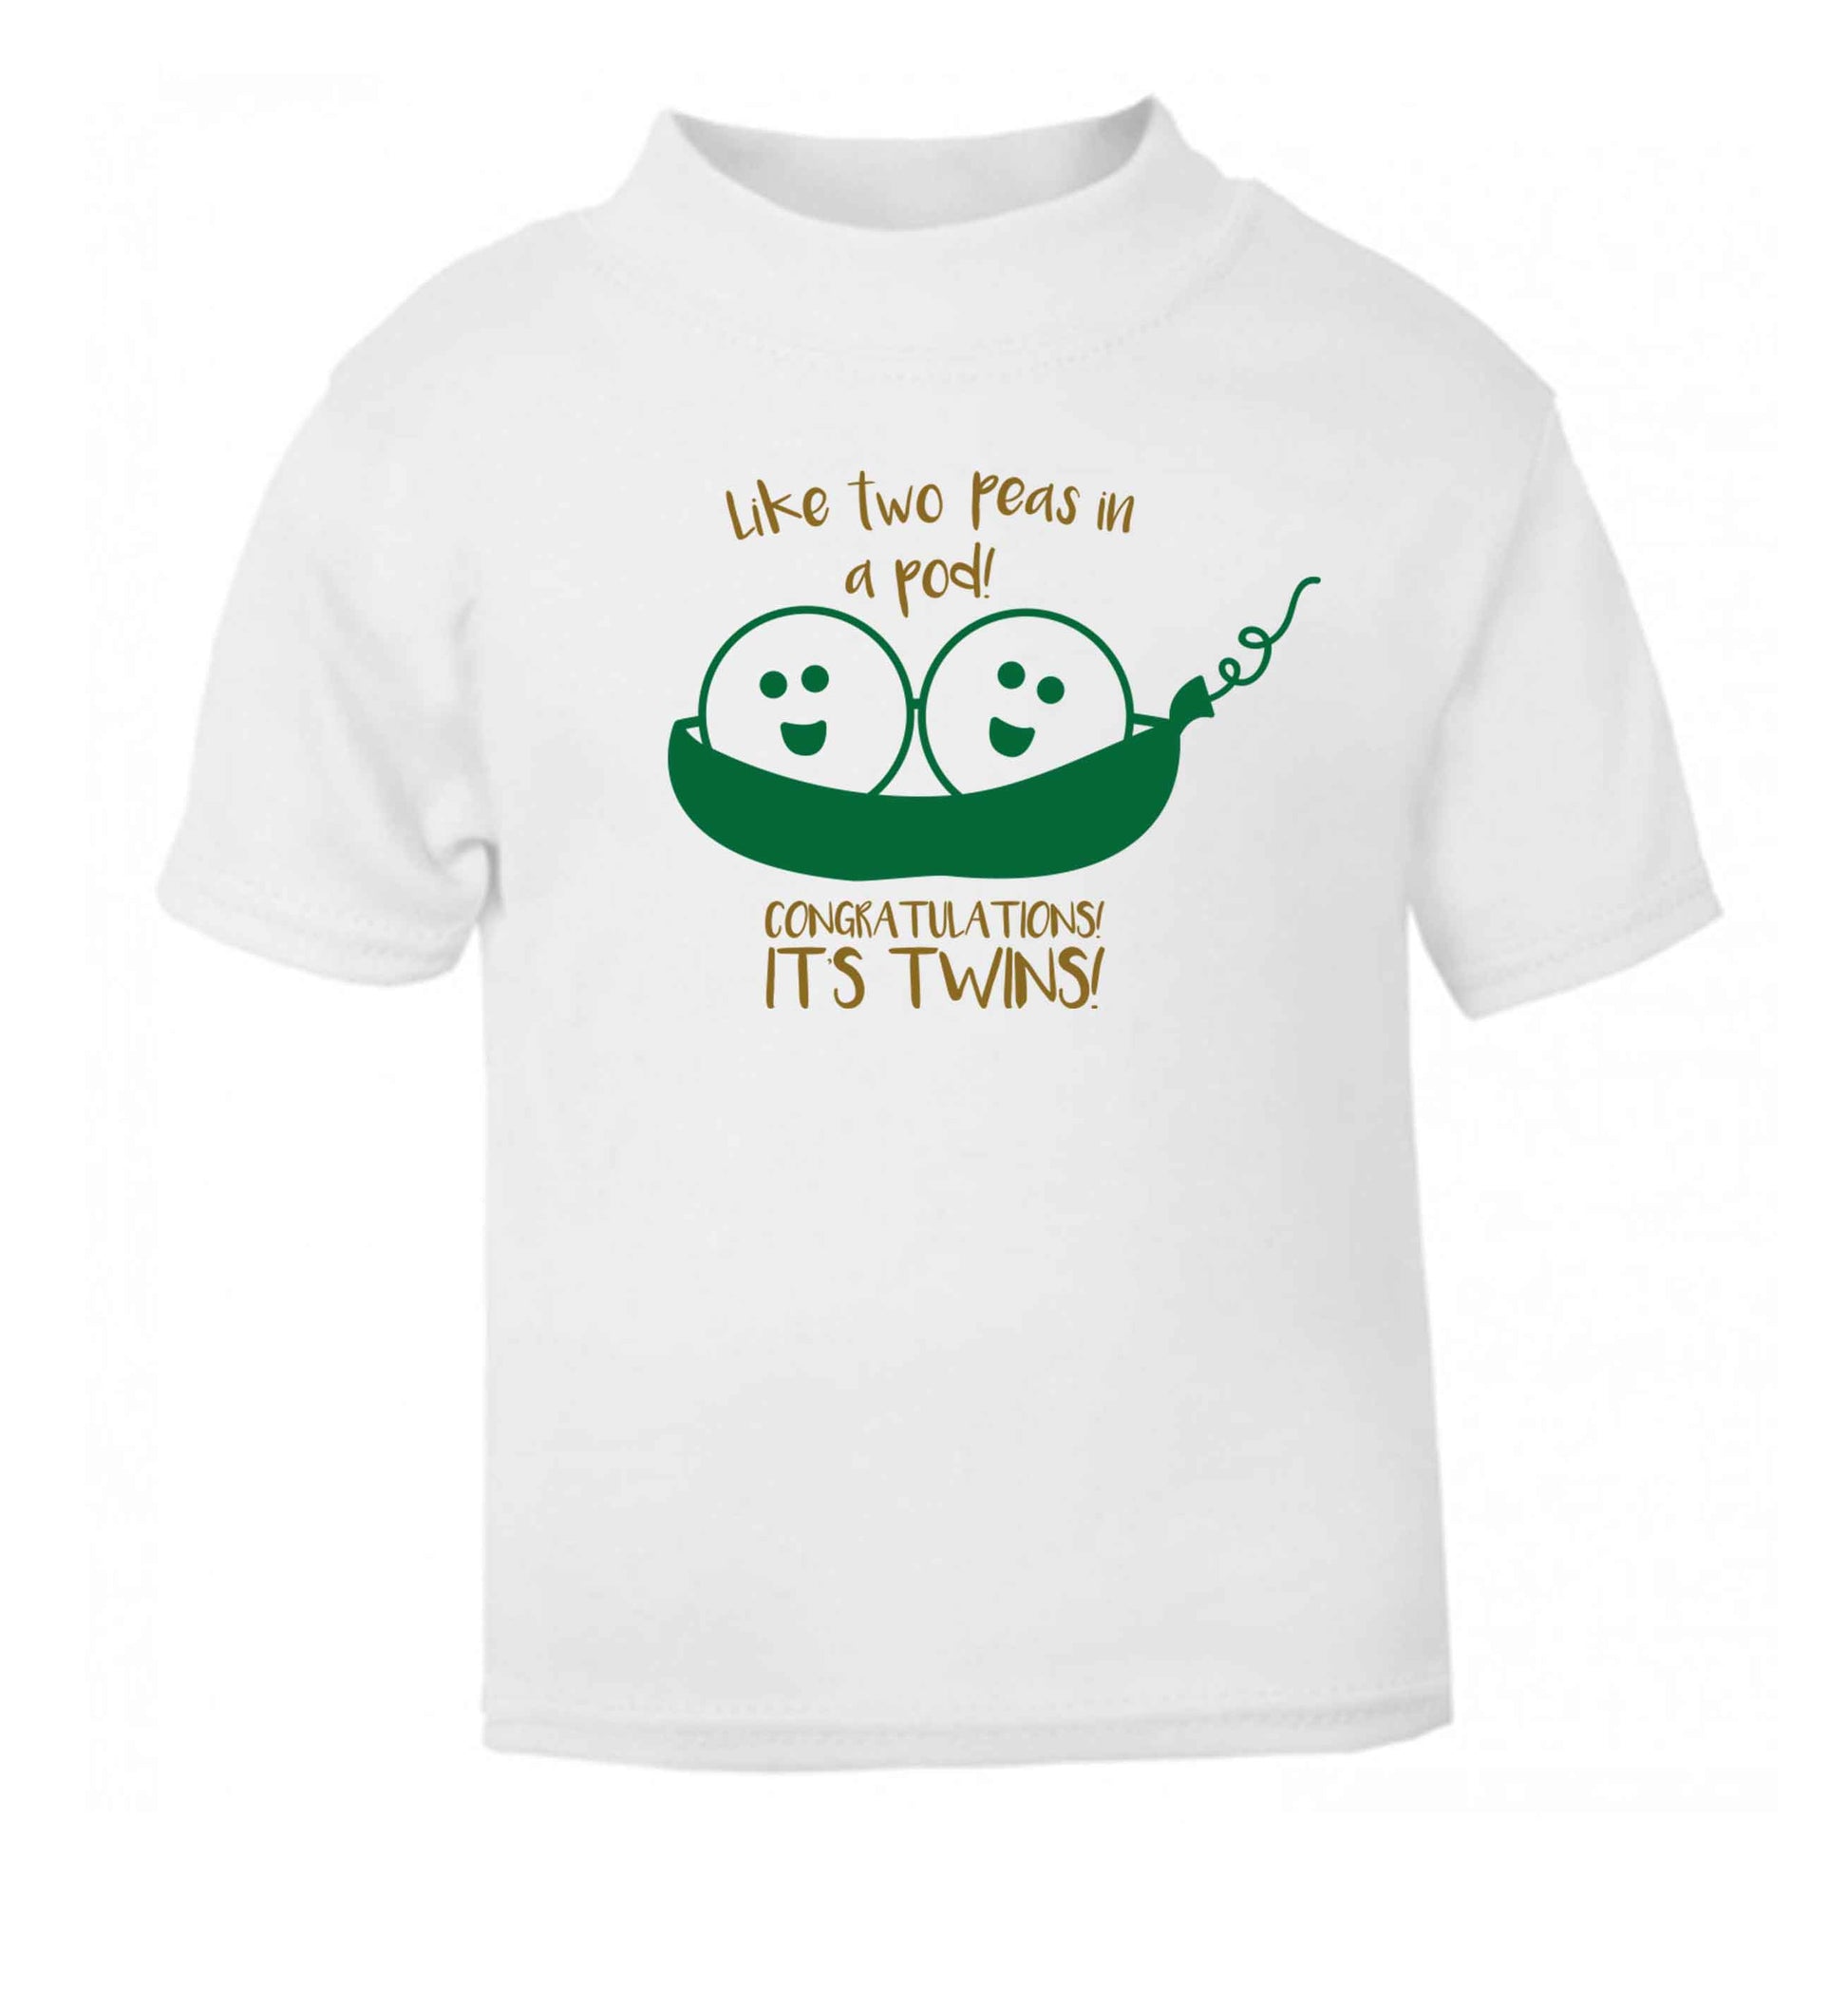 Like two peas in a pod! Congratulations it's twins! white baby toddler Tshirt 2 Years